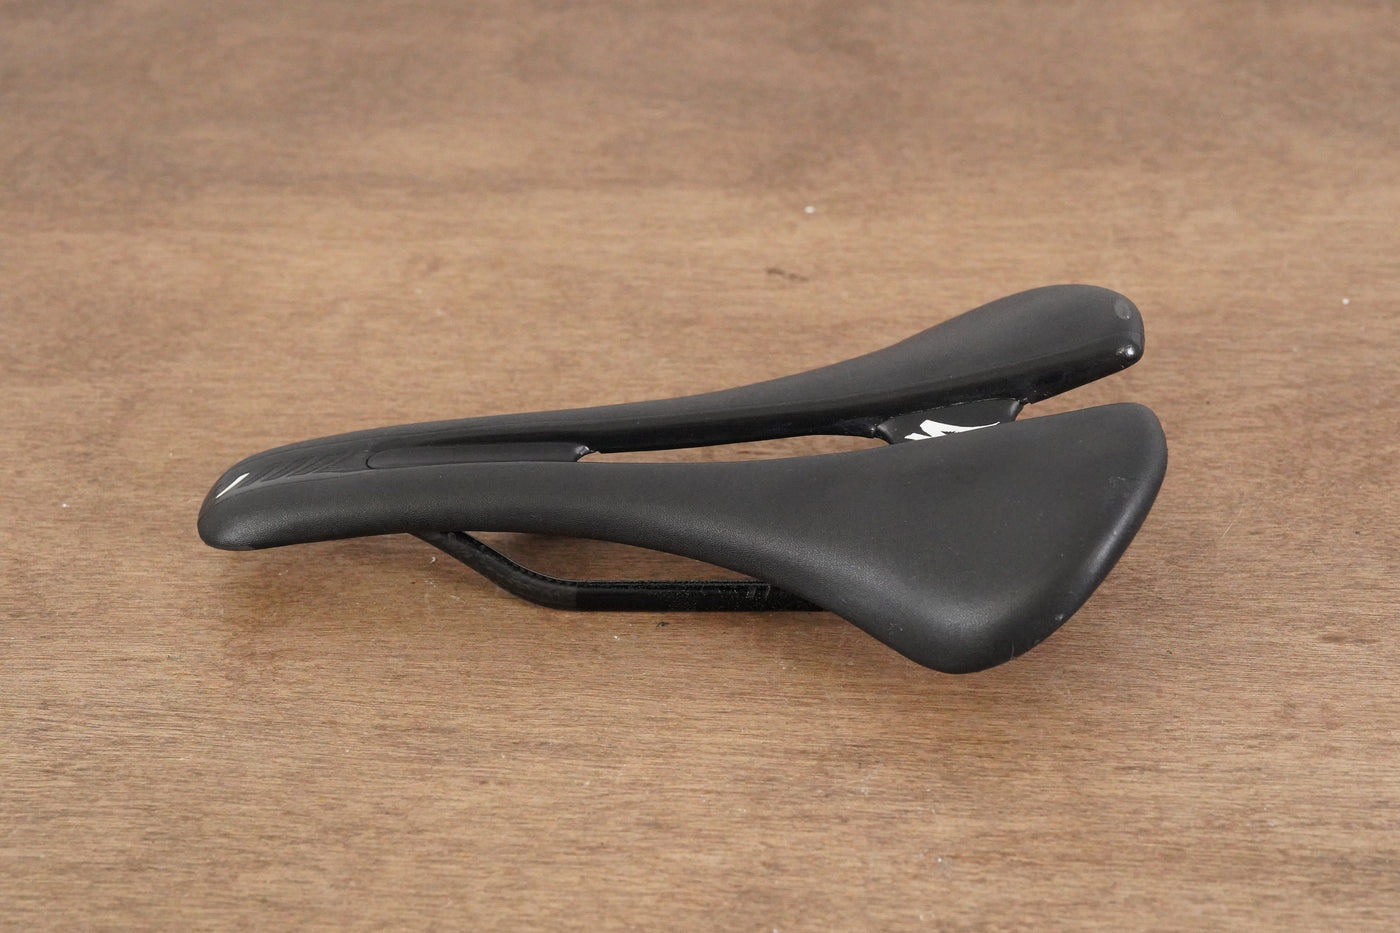 155mm Specialized Romin Evo Pro Carbon Rail Saddle 167g